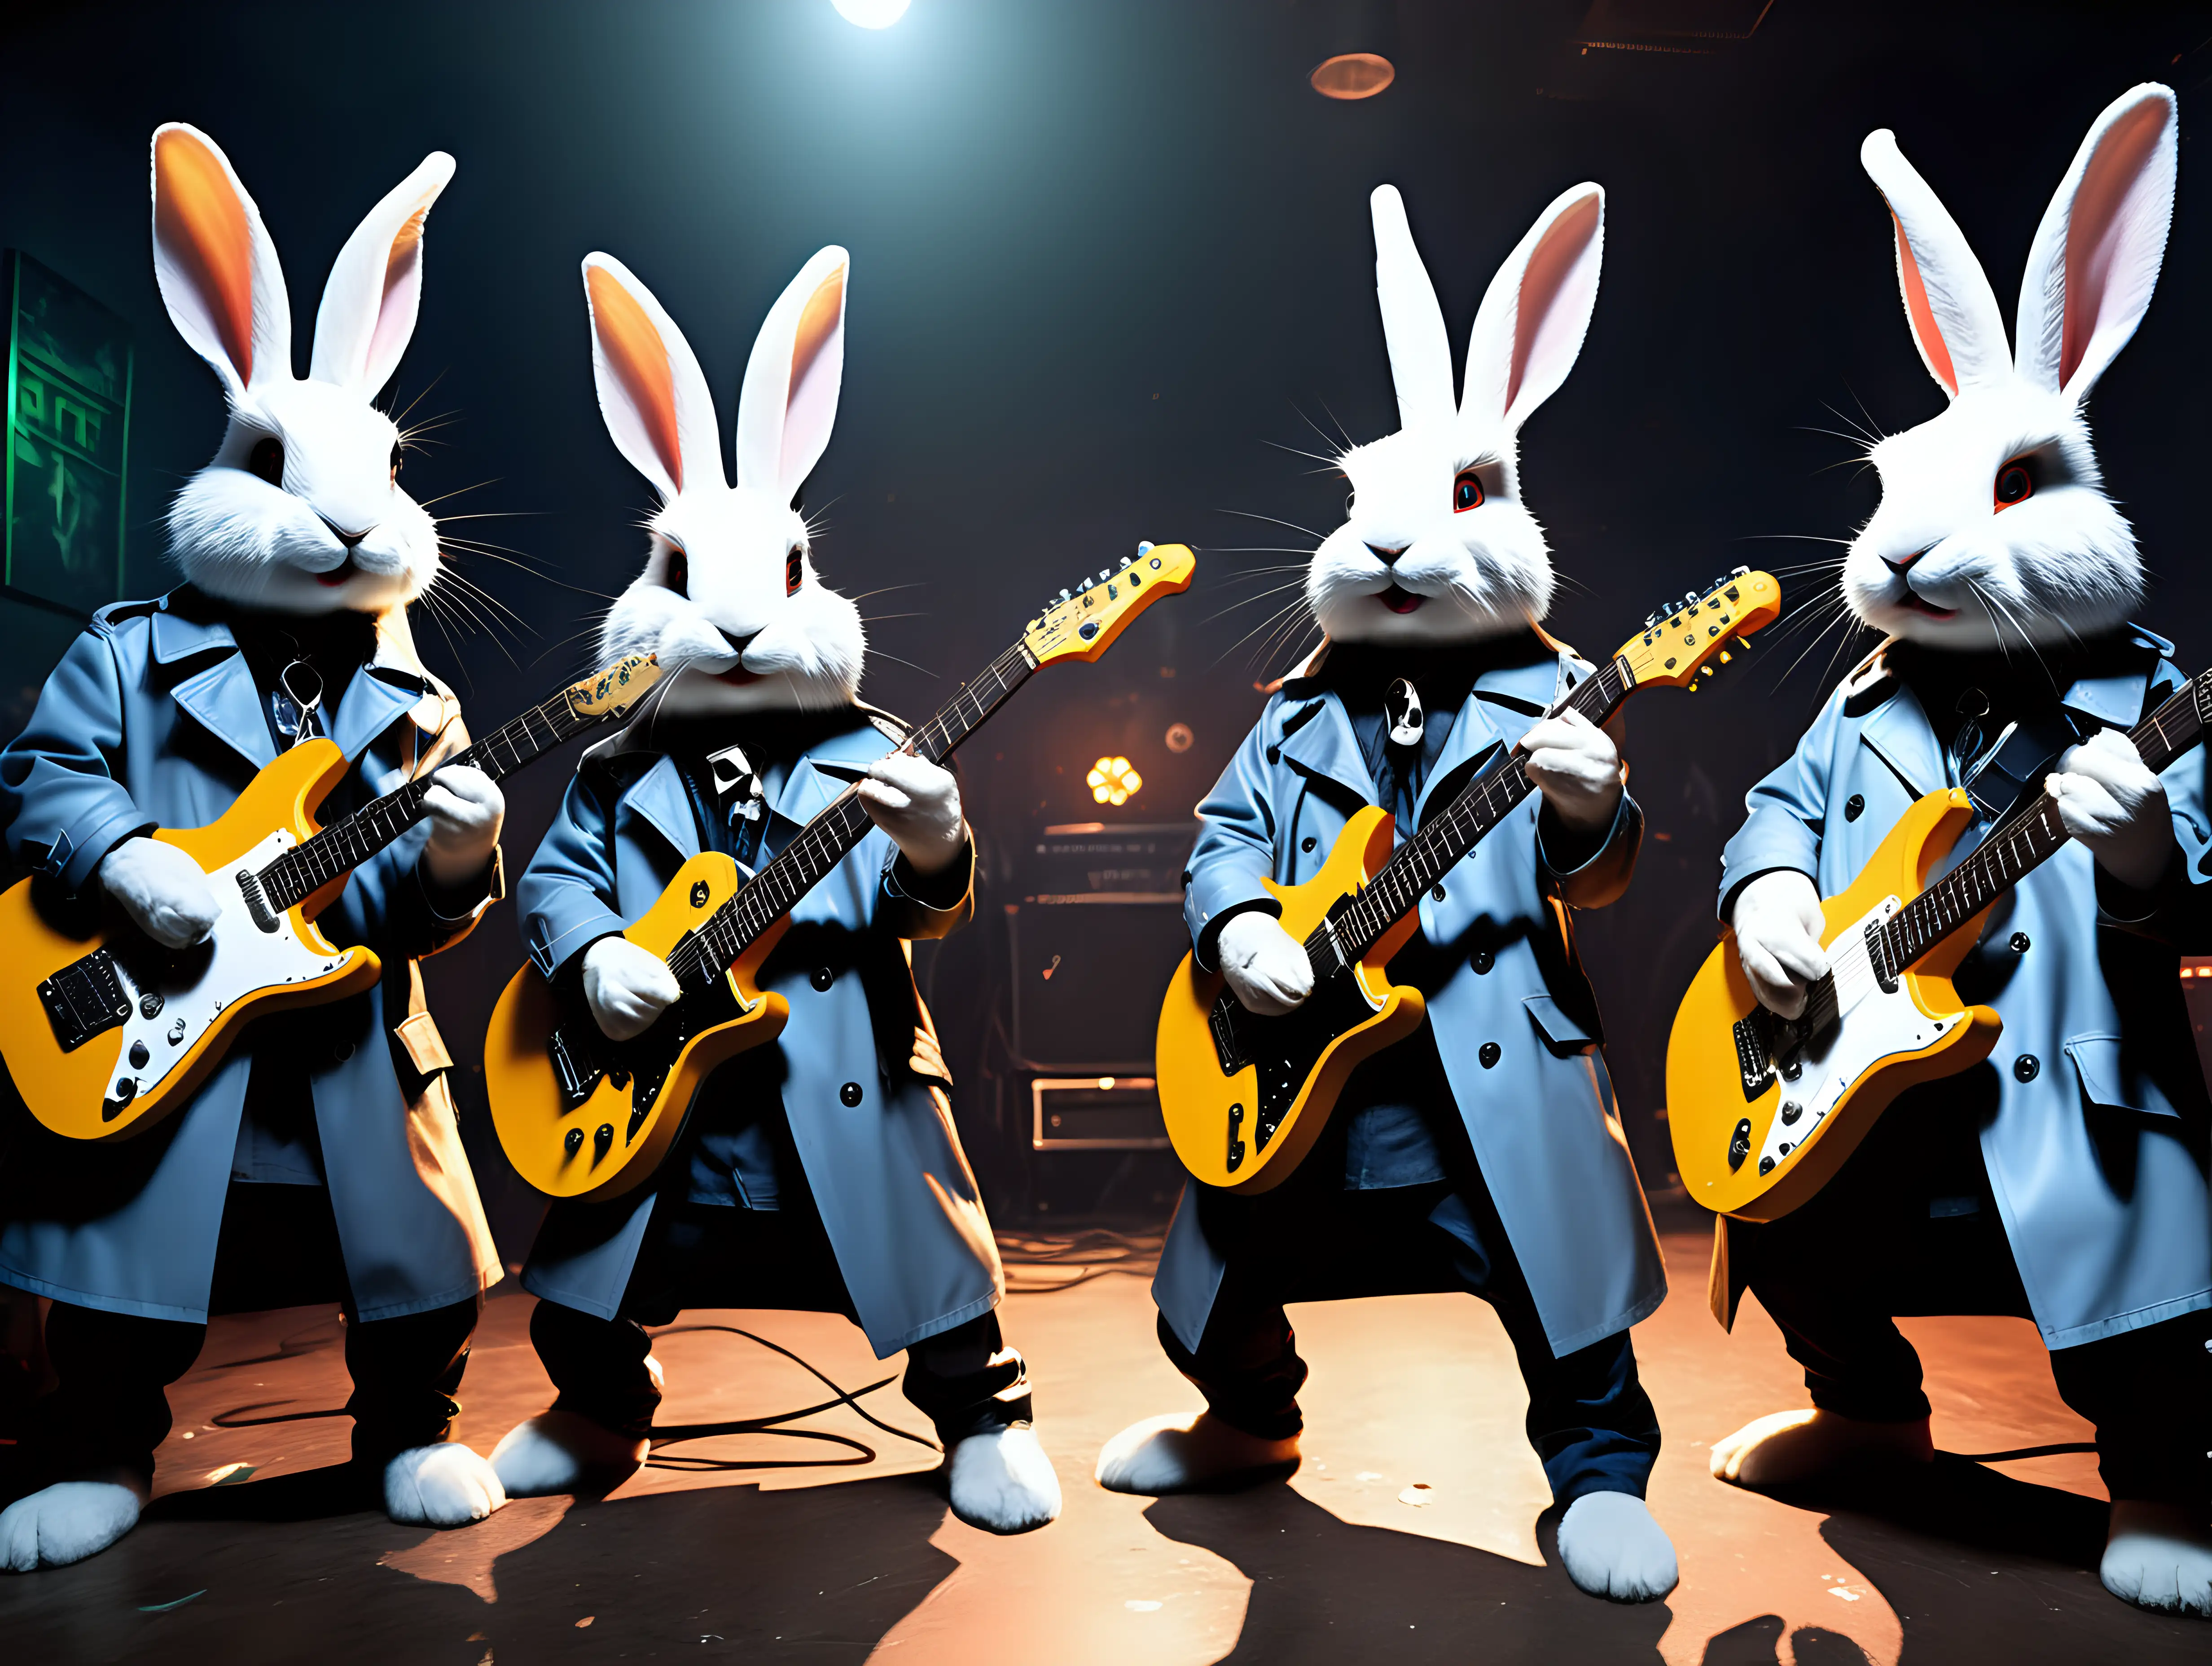 5 rabbits in trench coats playing heavy metal guitars in a night club